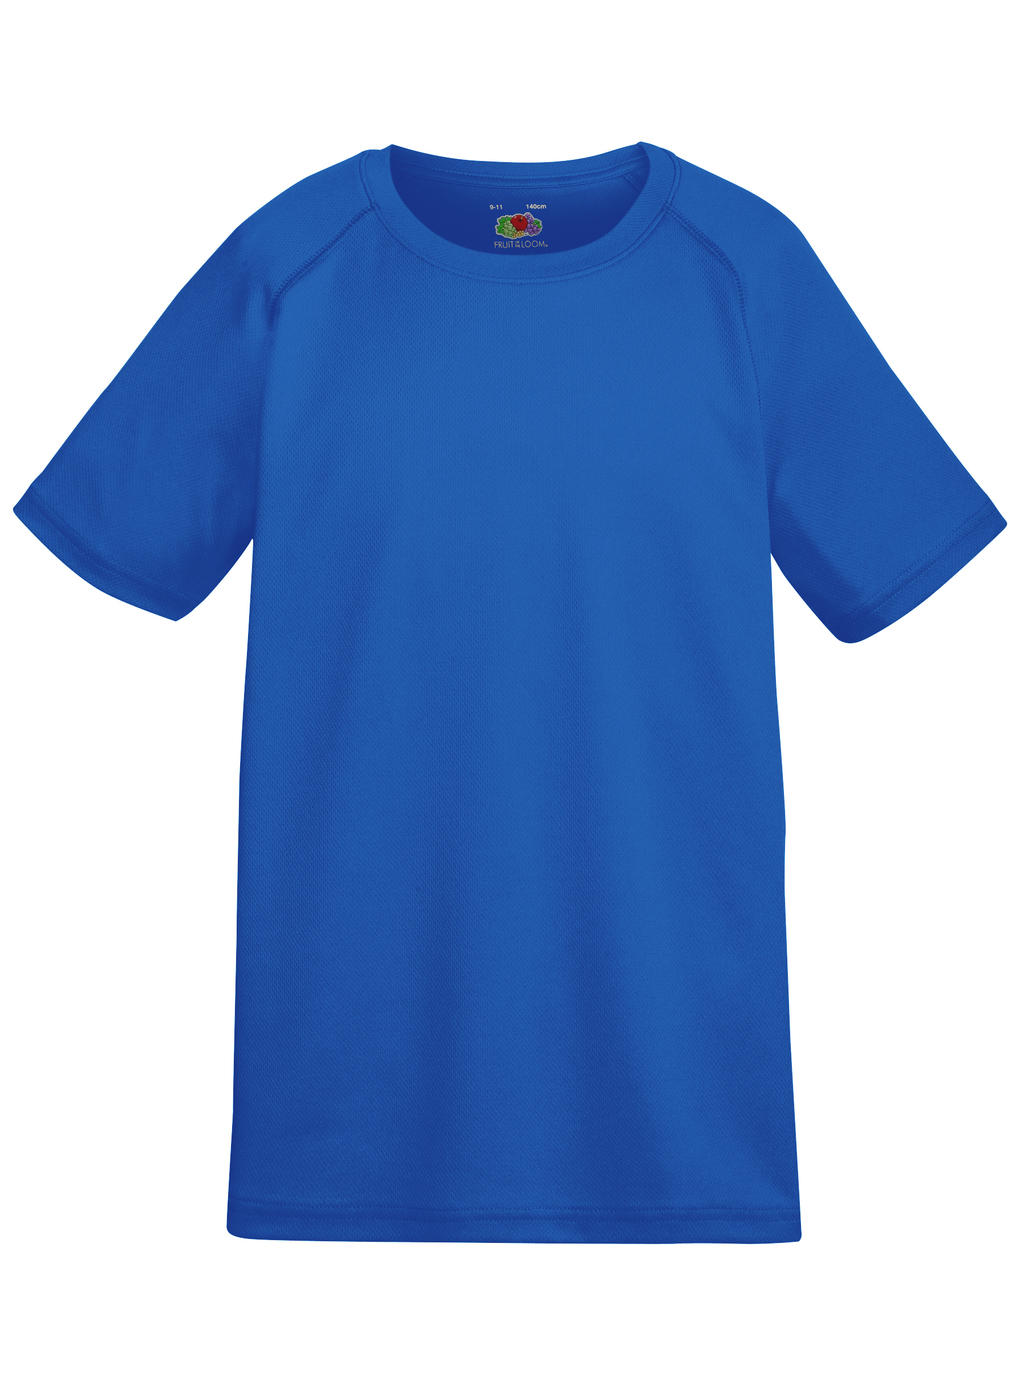  Kids Performance T in Farbe Royal